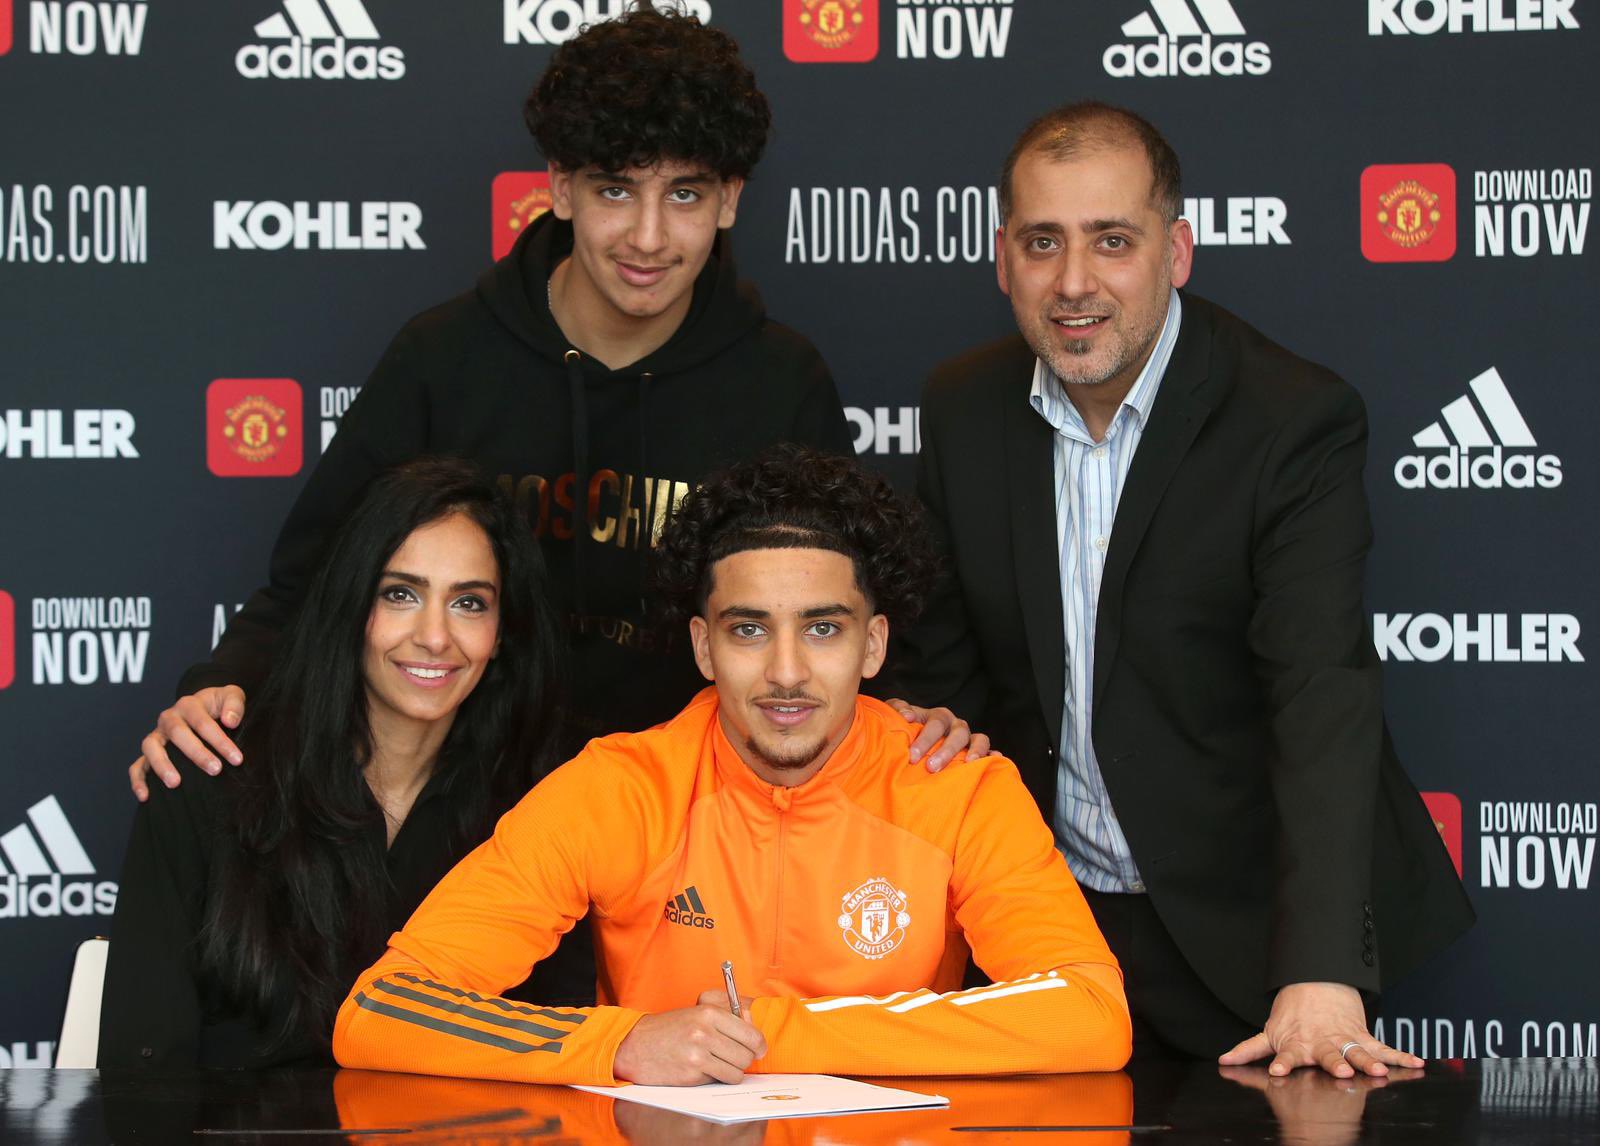 Zidane Iqbal signed a professional contract with Man United in June.